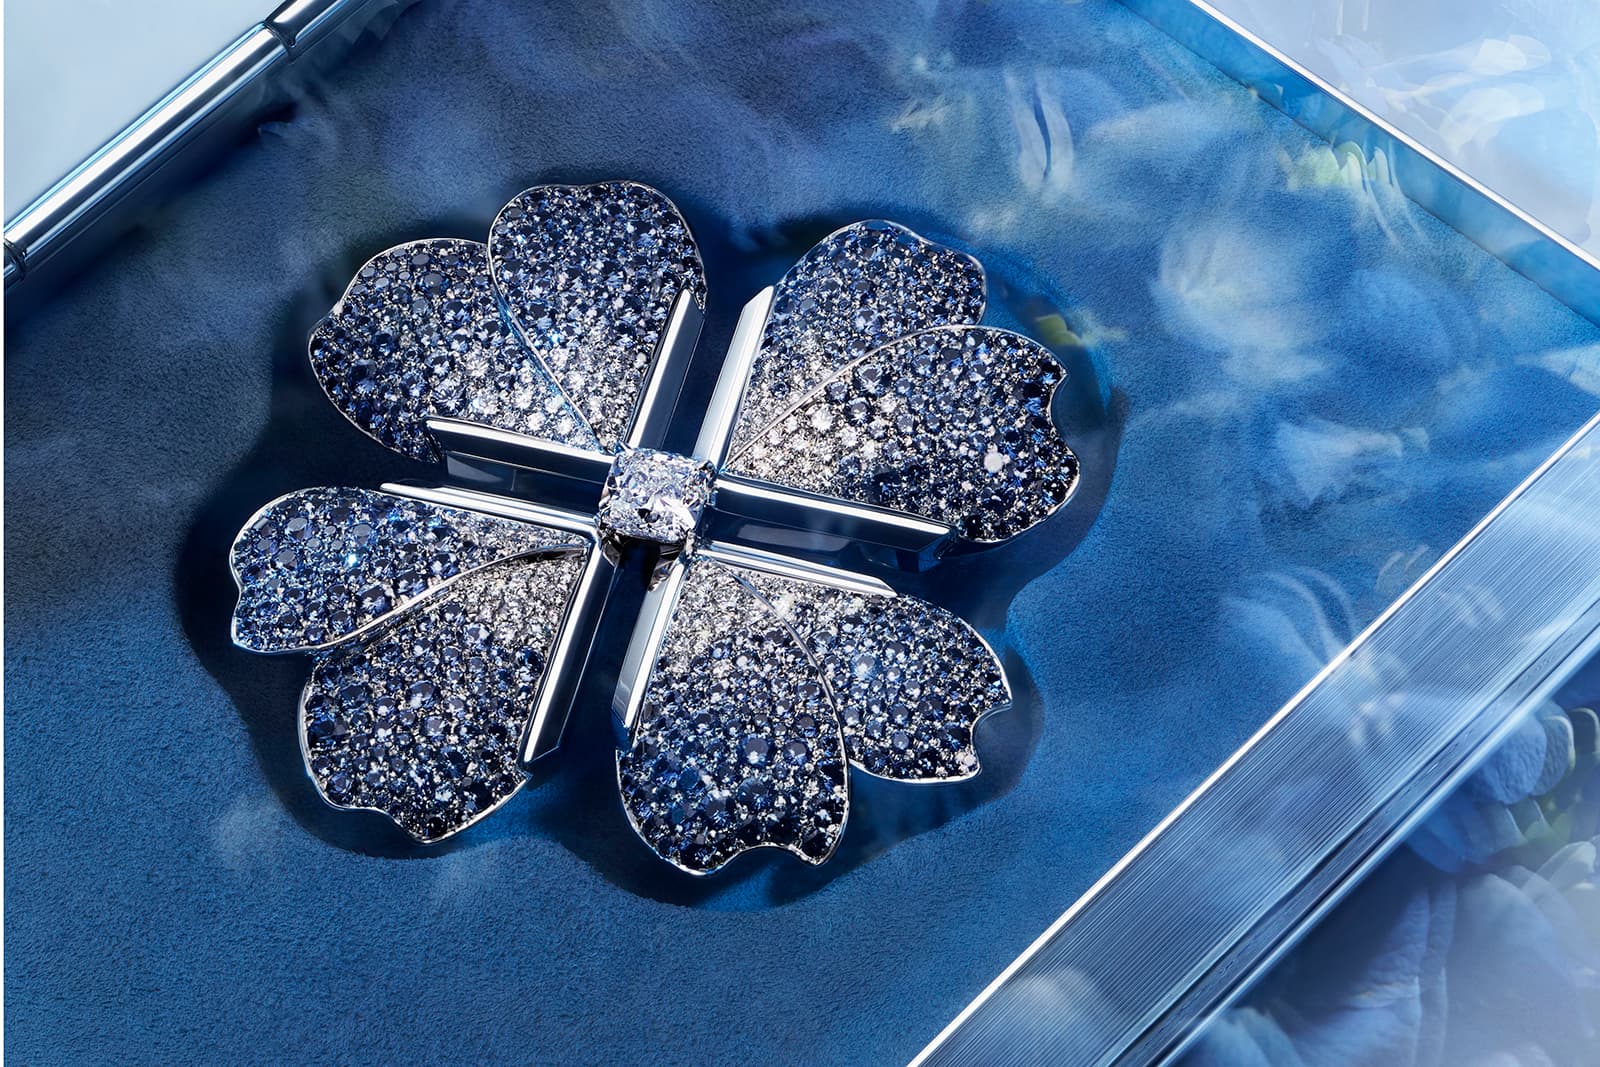 Tiffany&Co. Blue Book 2019 collection brooch with over 2ct cushion cut diamond, sapphires and diamonds in platinum